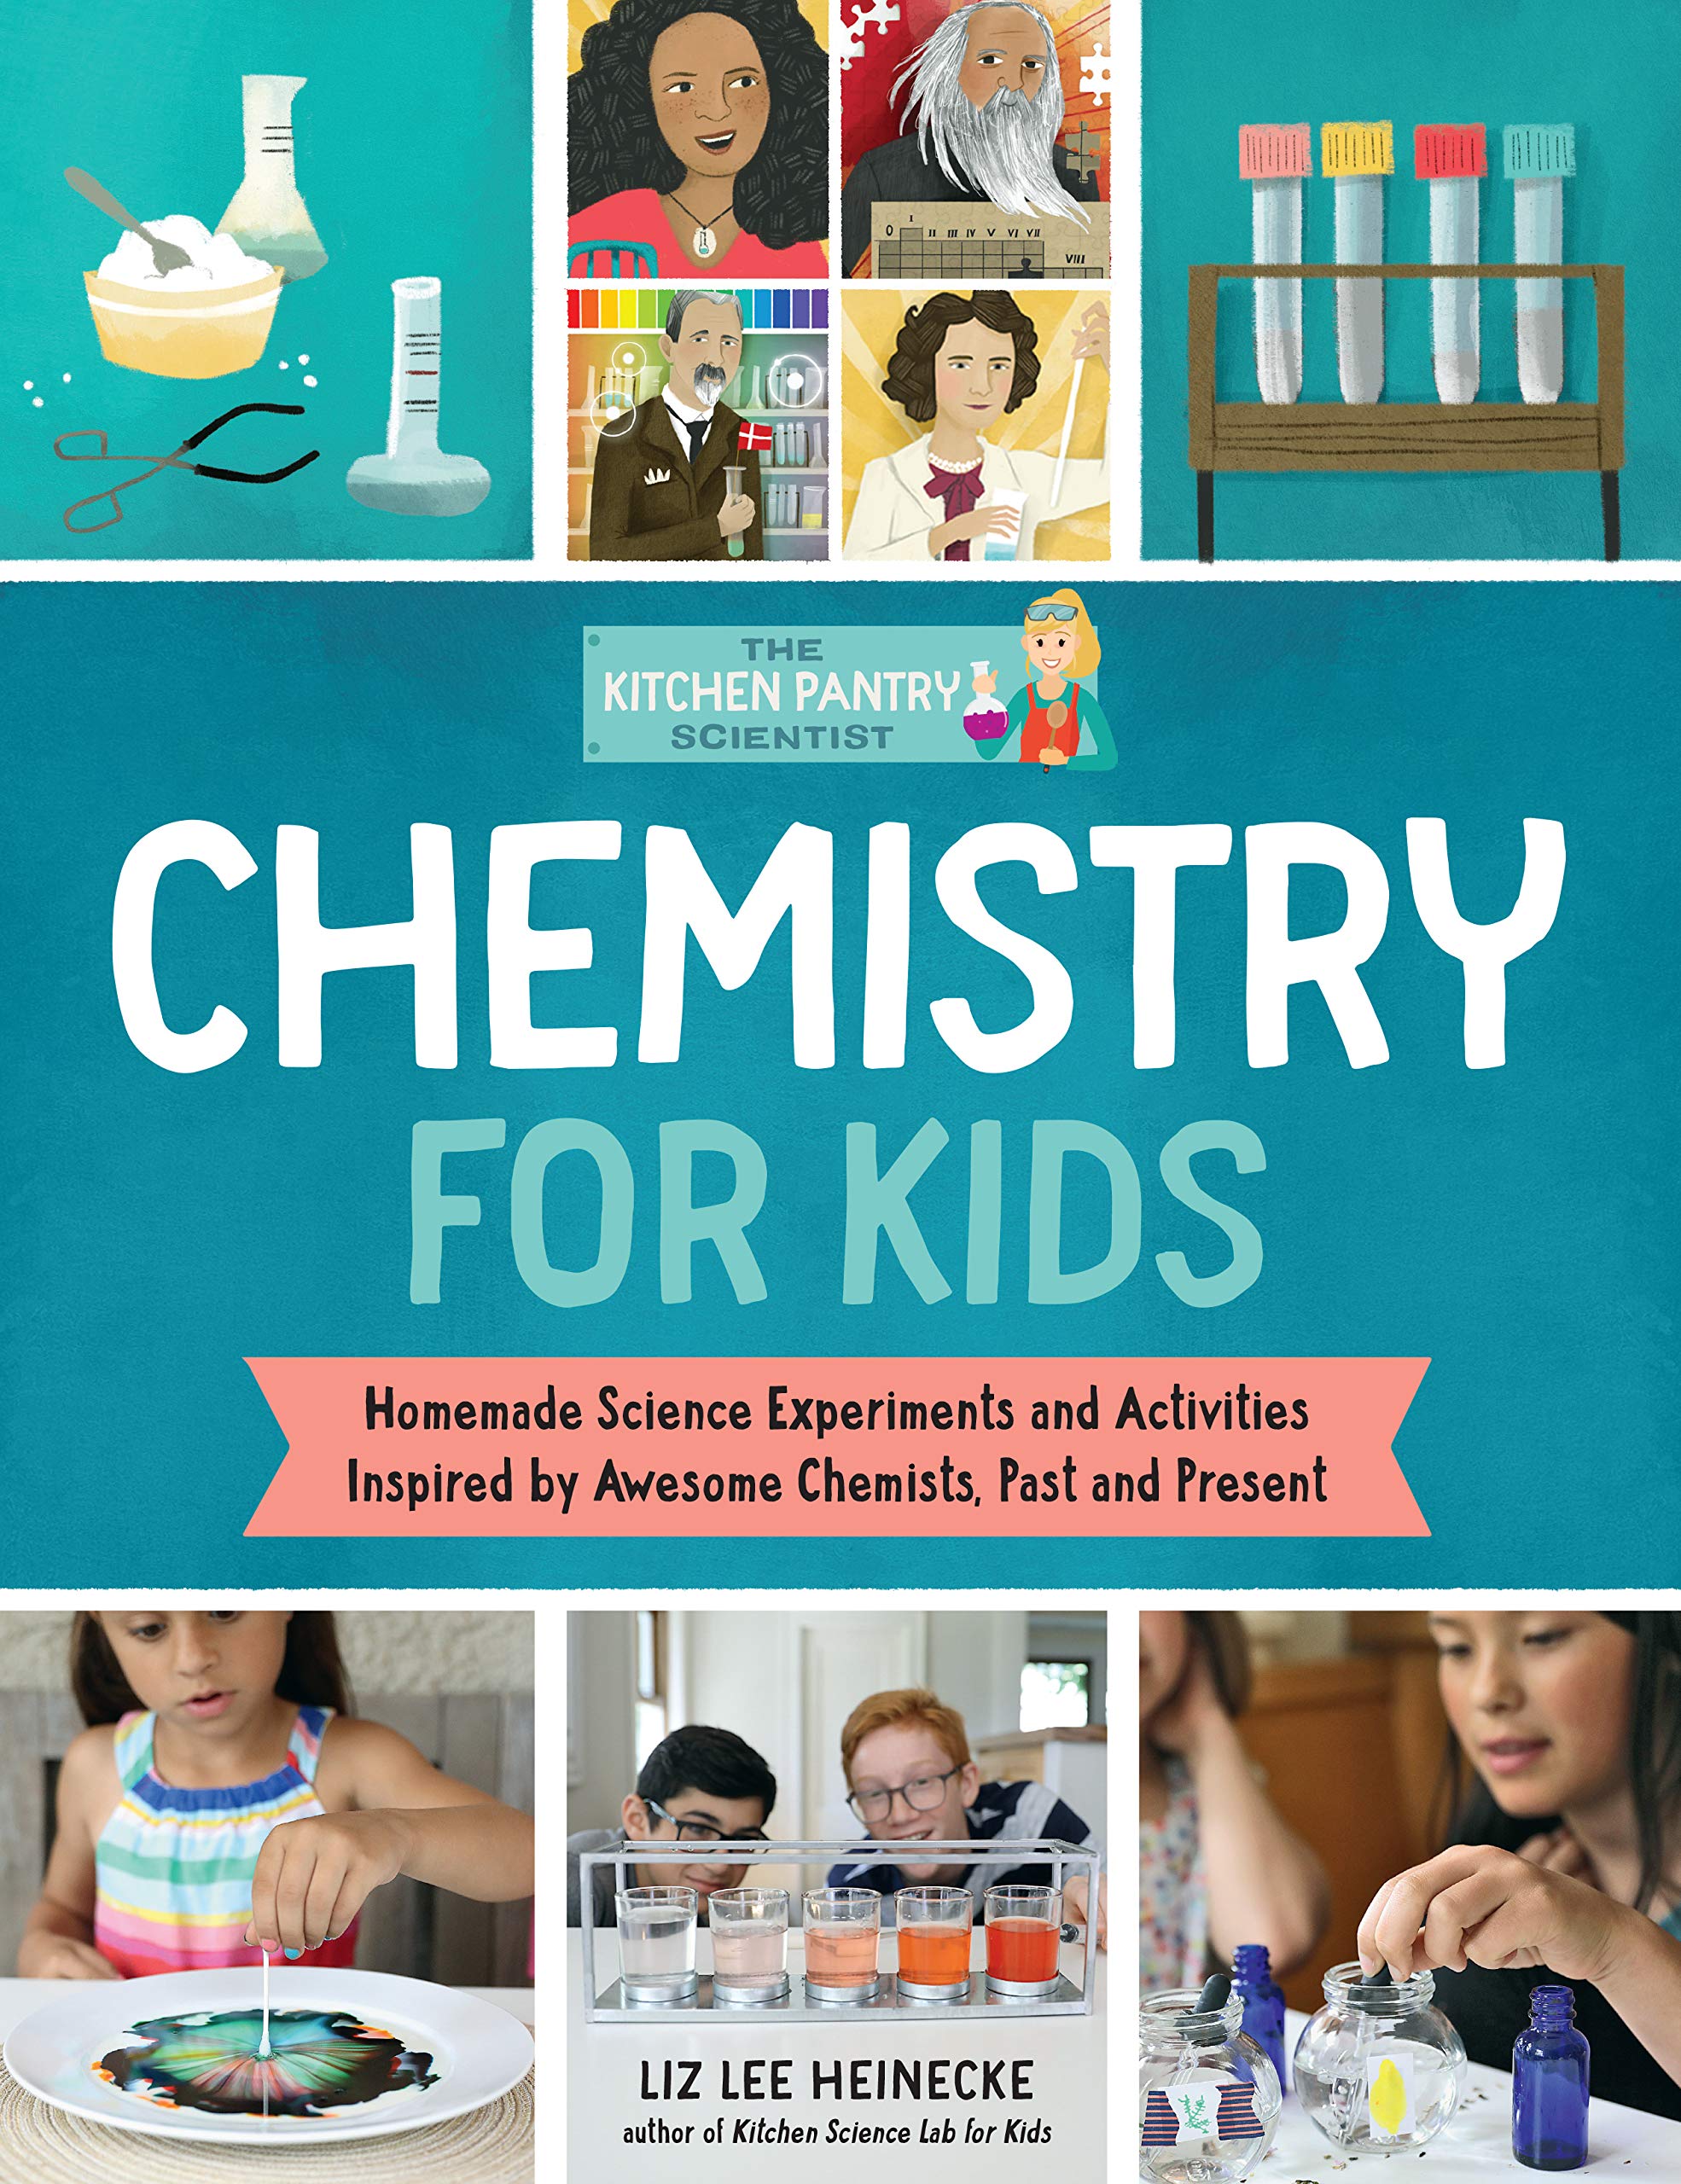 The Kitchen Pantry Scientist: Chemistry for Kids: Homemade Science Experiments and Activities Inspired by Awesome Chemists, Past and Present